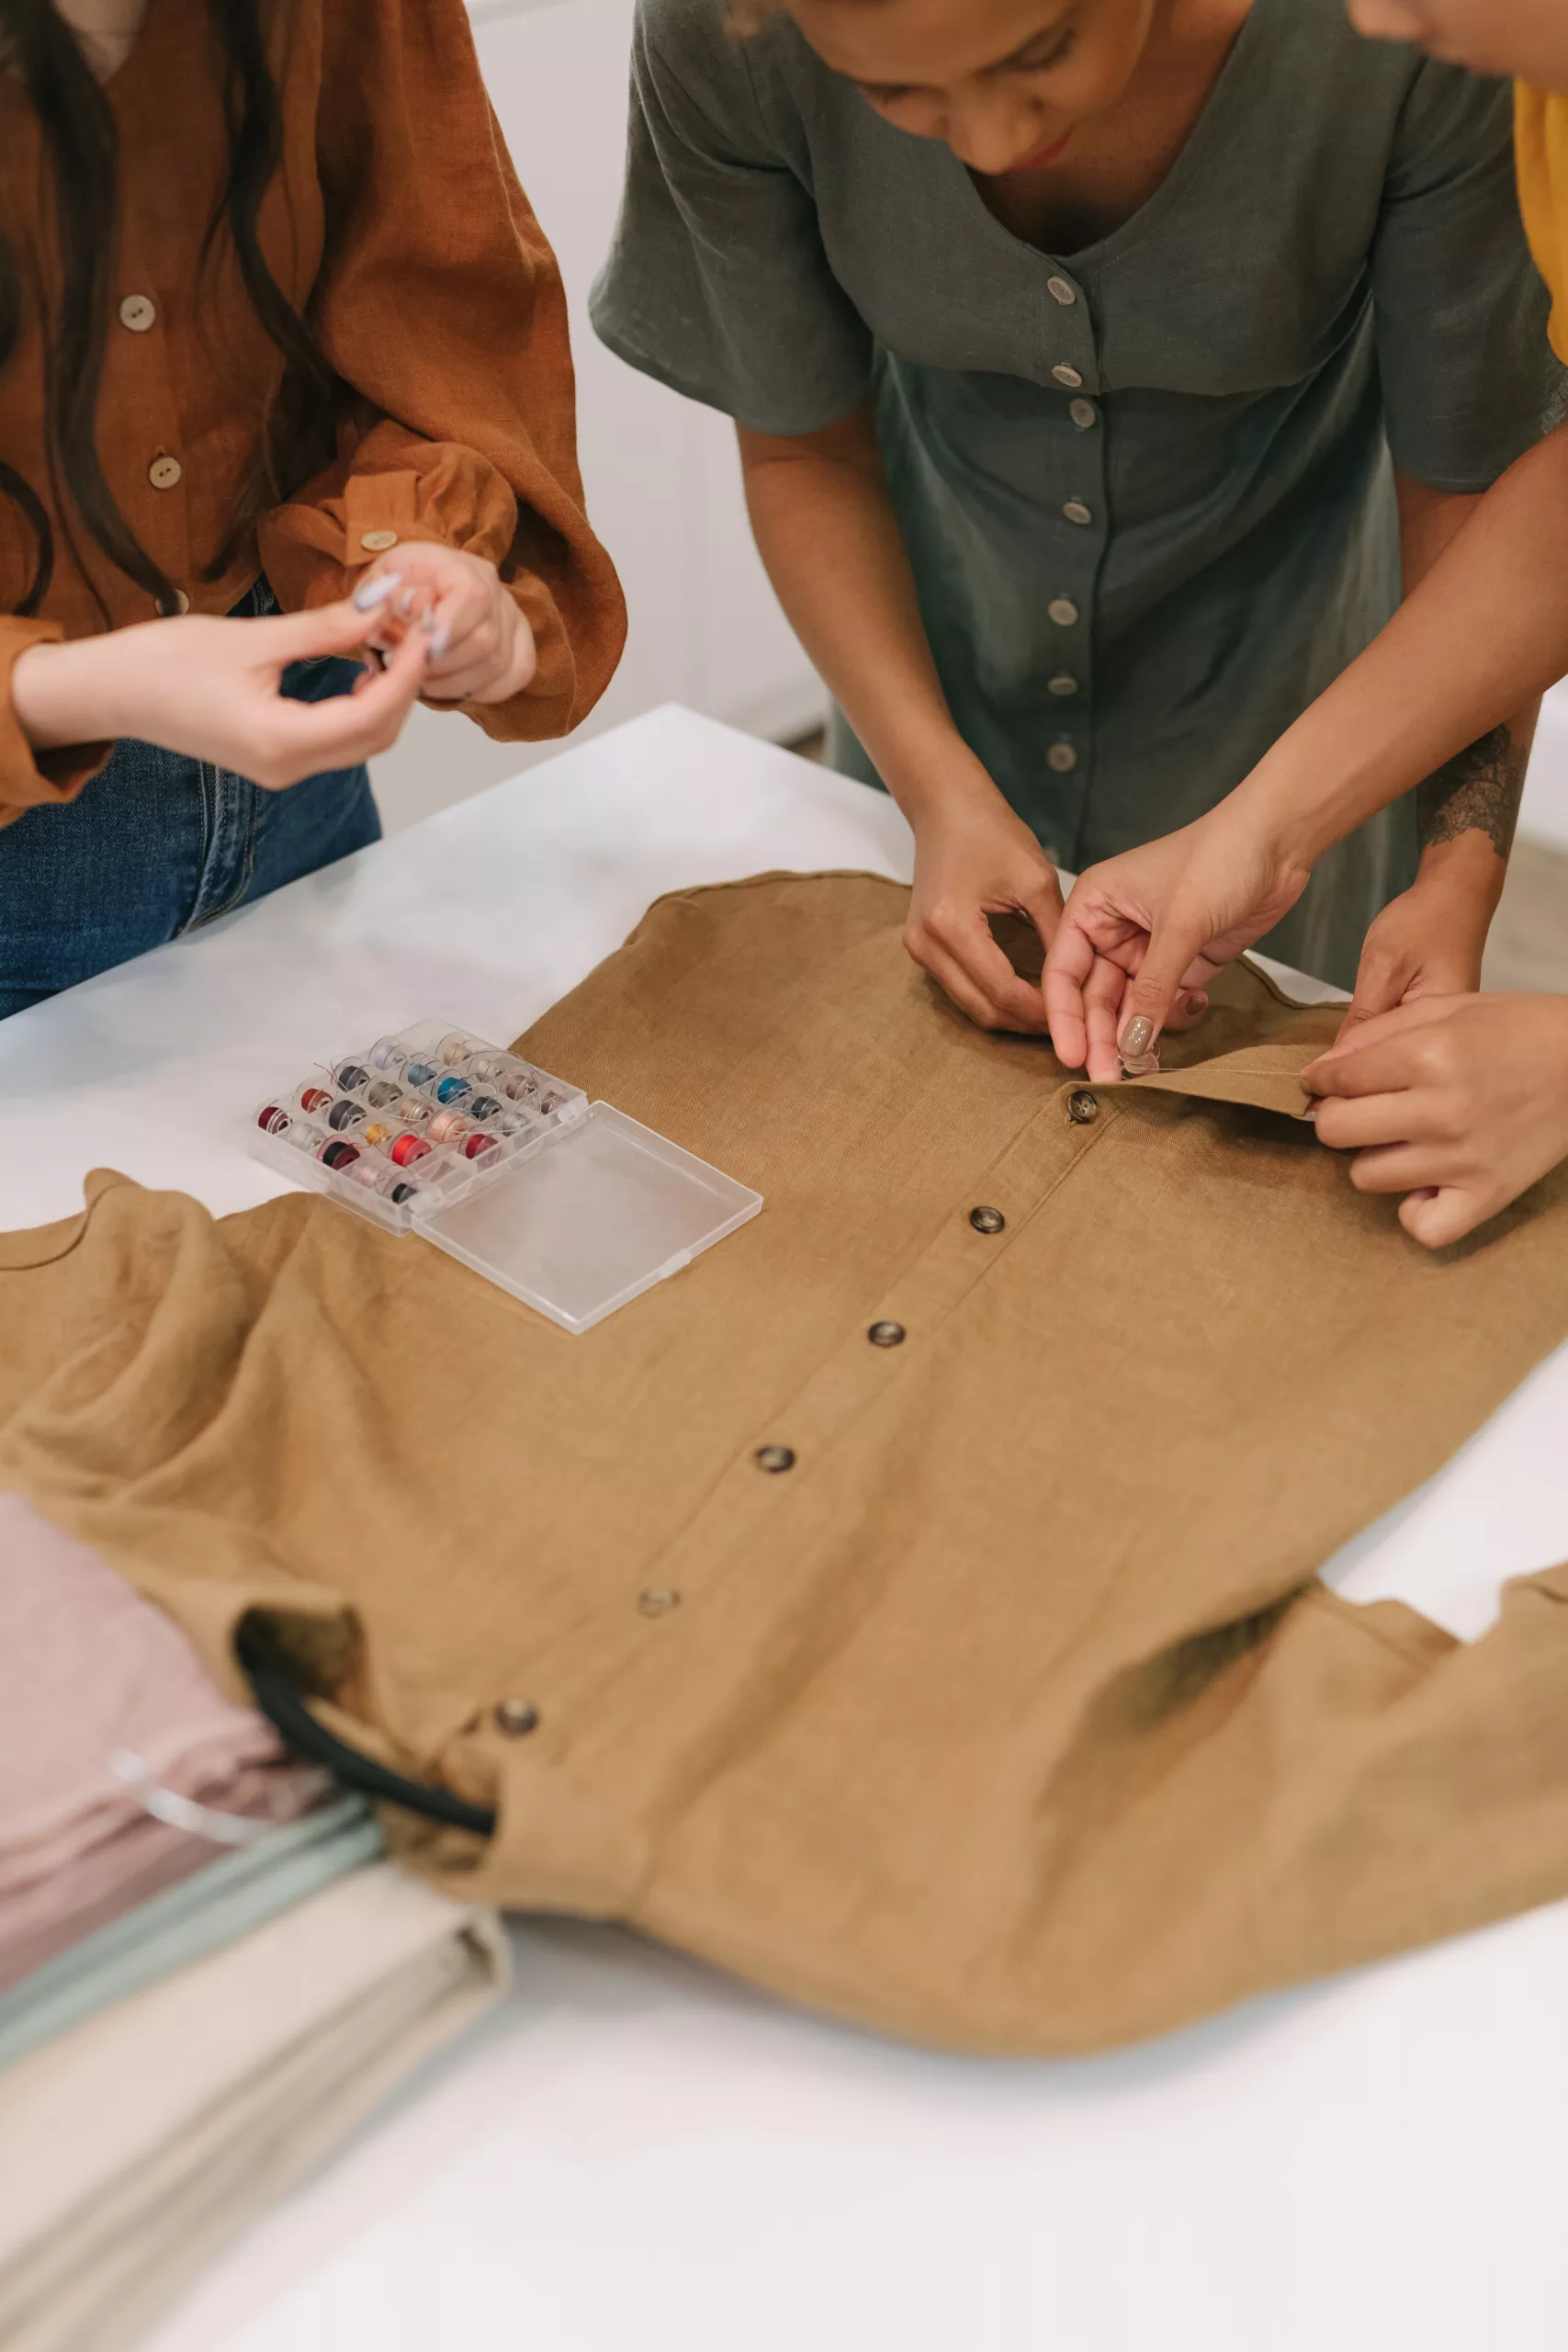 The Integration of Hemp Clothing within the Slow Fashion Movement